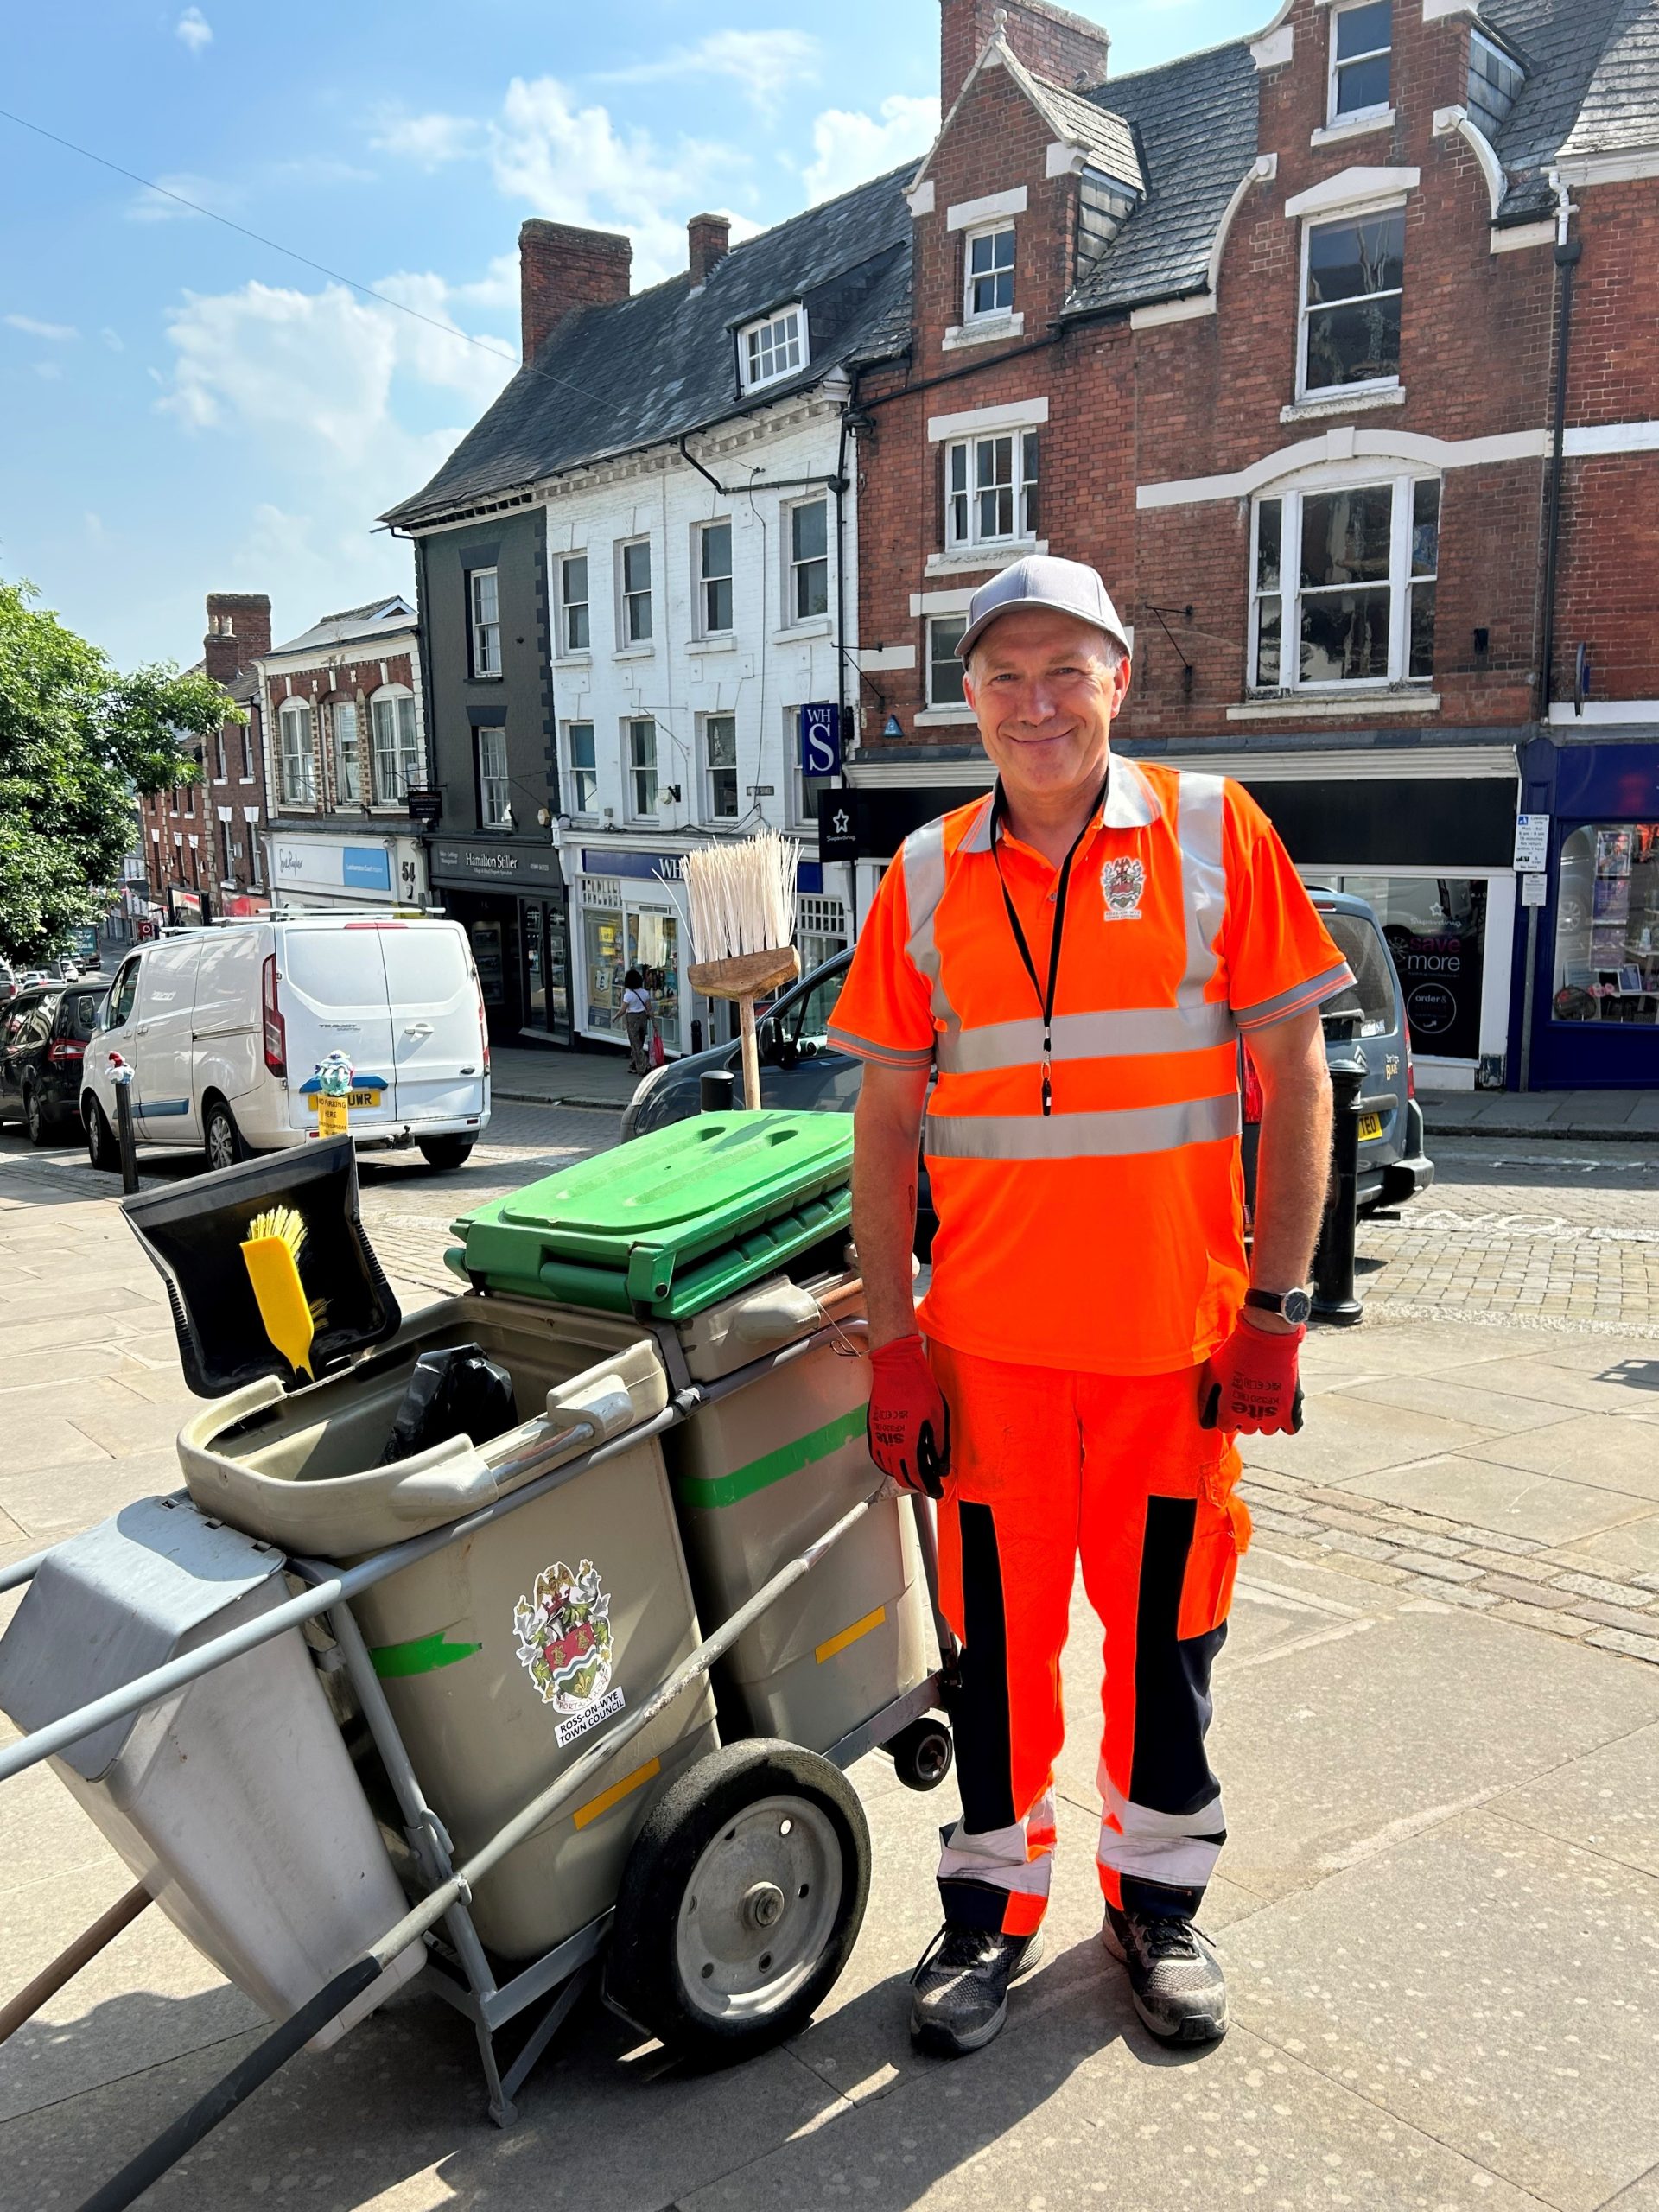 NEWS | Ross-on-Wye Town Council are delighted to announce a new Town Centre Cleansing Operative has joined the team